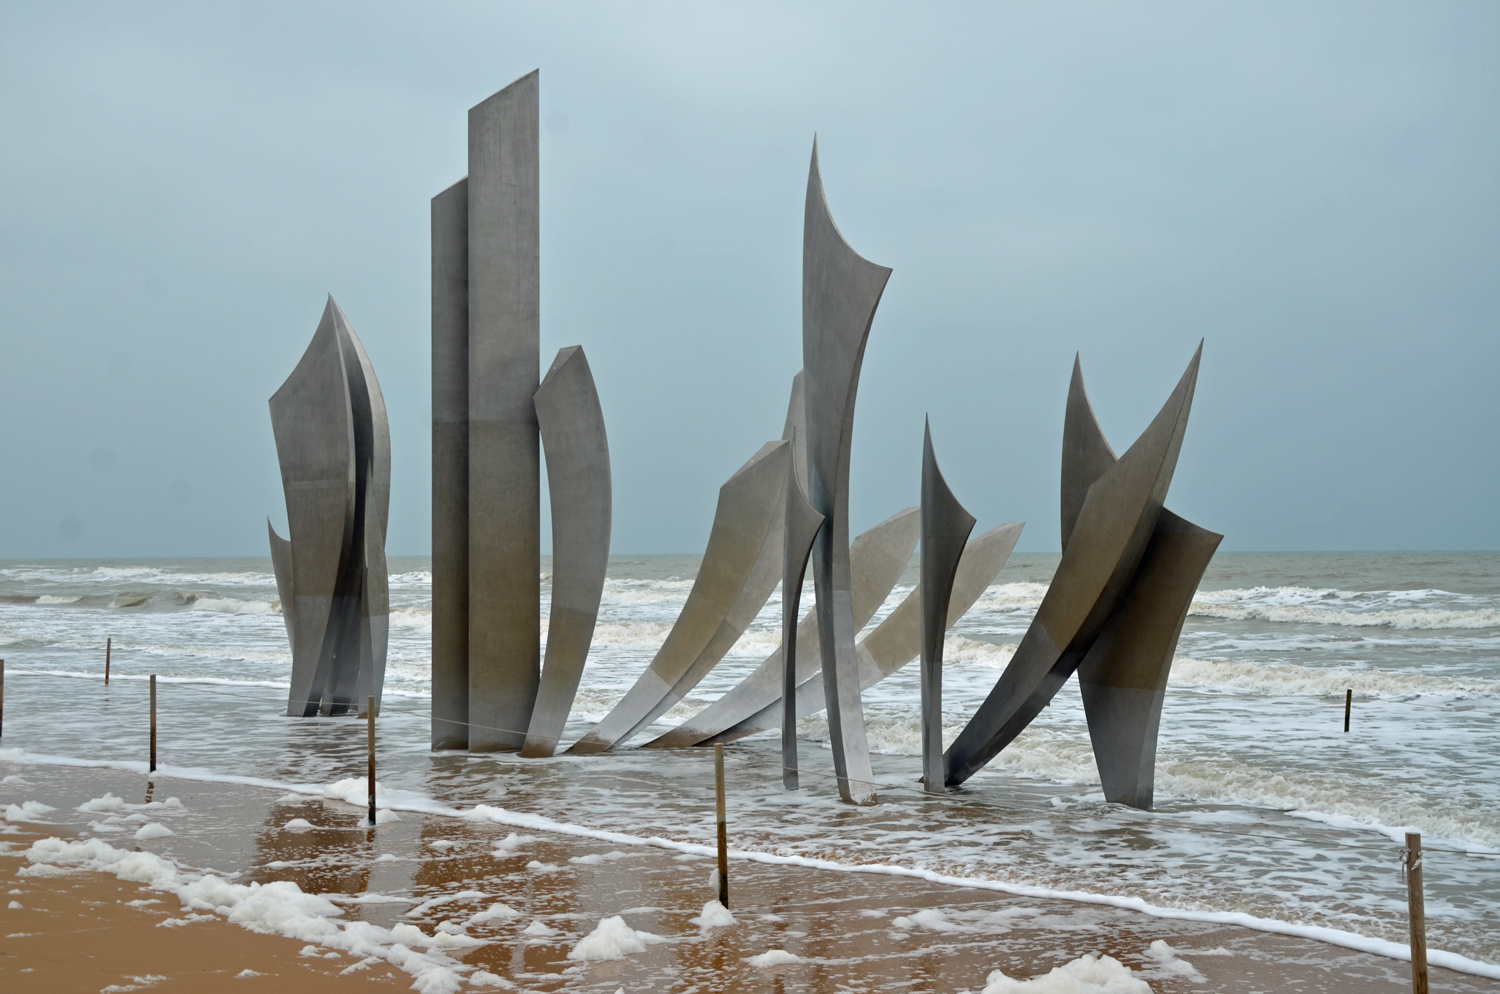 'Les Braves,' on Omaha Beach, a monument installed there in 2004 to commemorate the 60th anniversary of the D-Day landing. Click on the image for larger view. (© FlaglerLive)